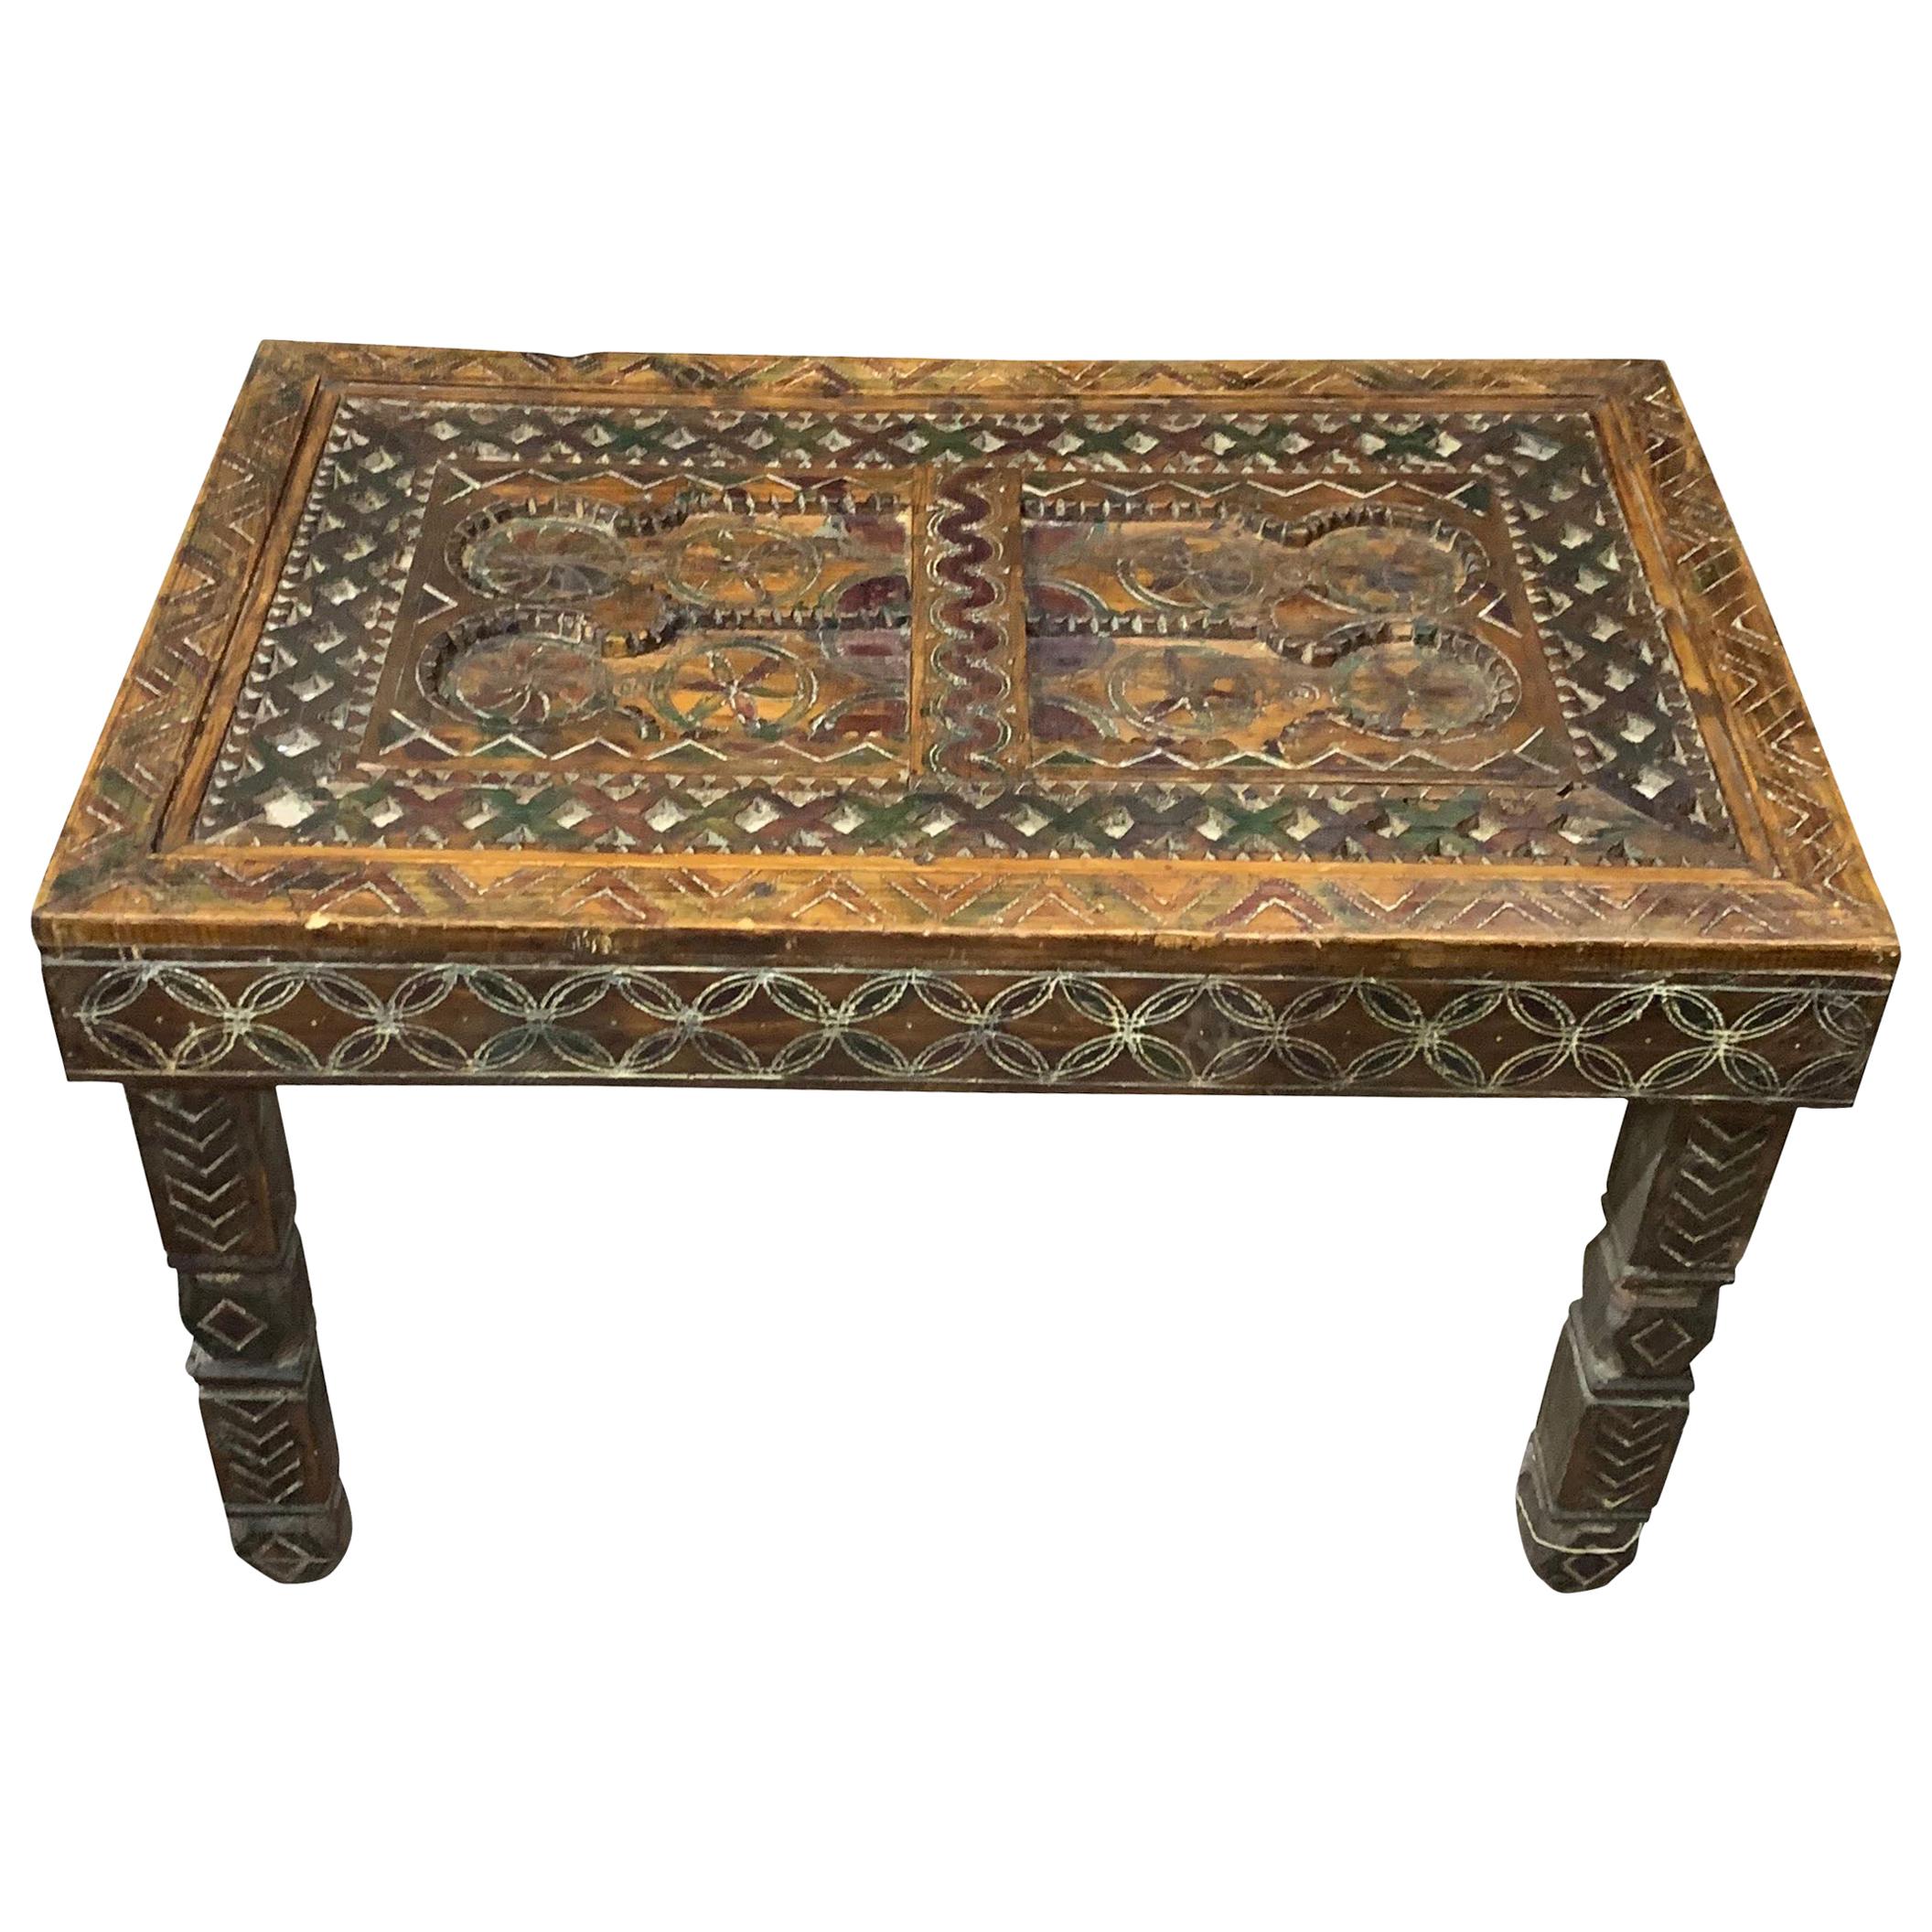 Hand Carved Decorative Wood Coffee Table, Morocco, 19th Century